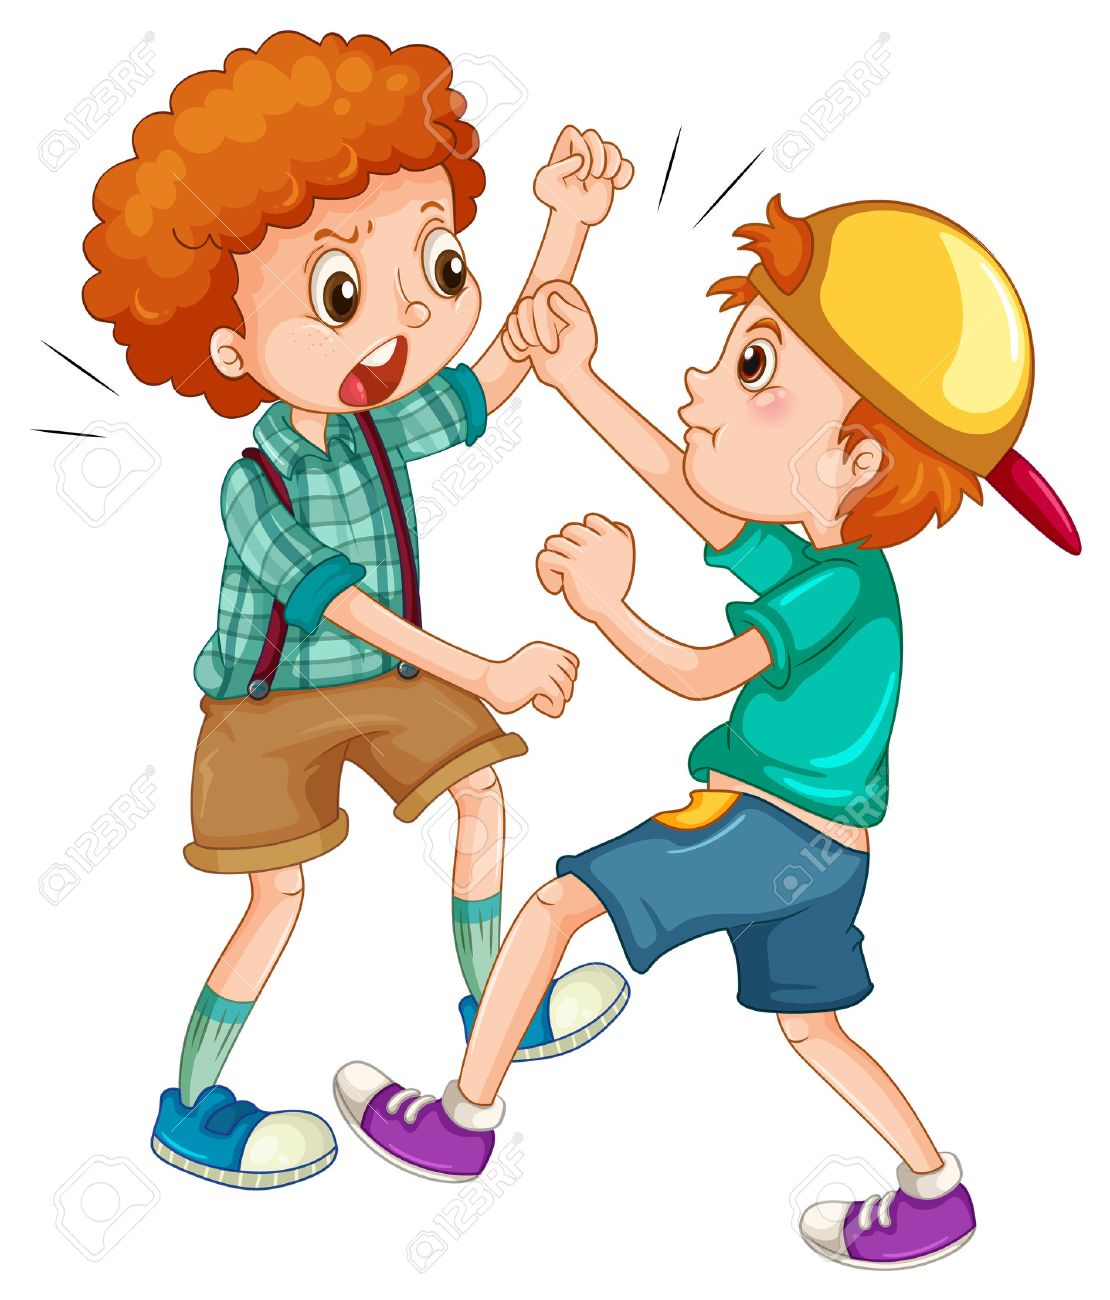 Two People Fighting Clipart